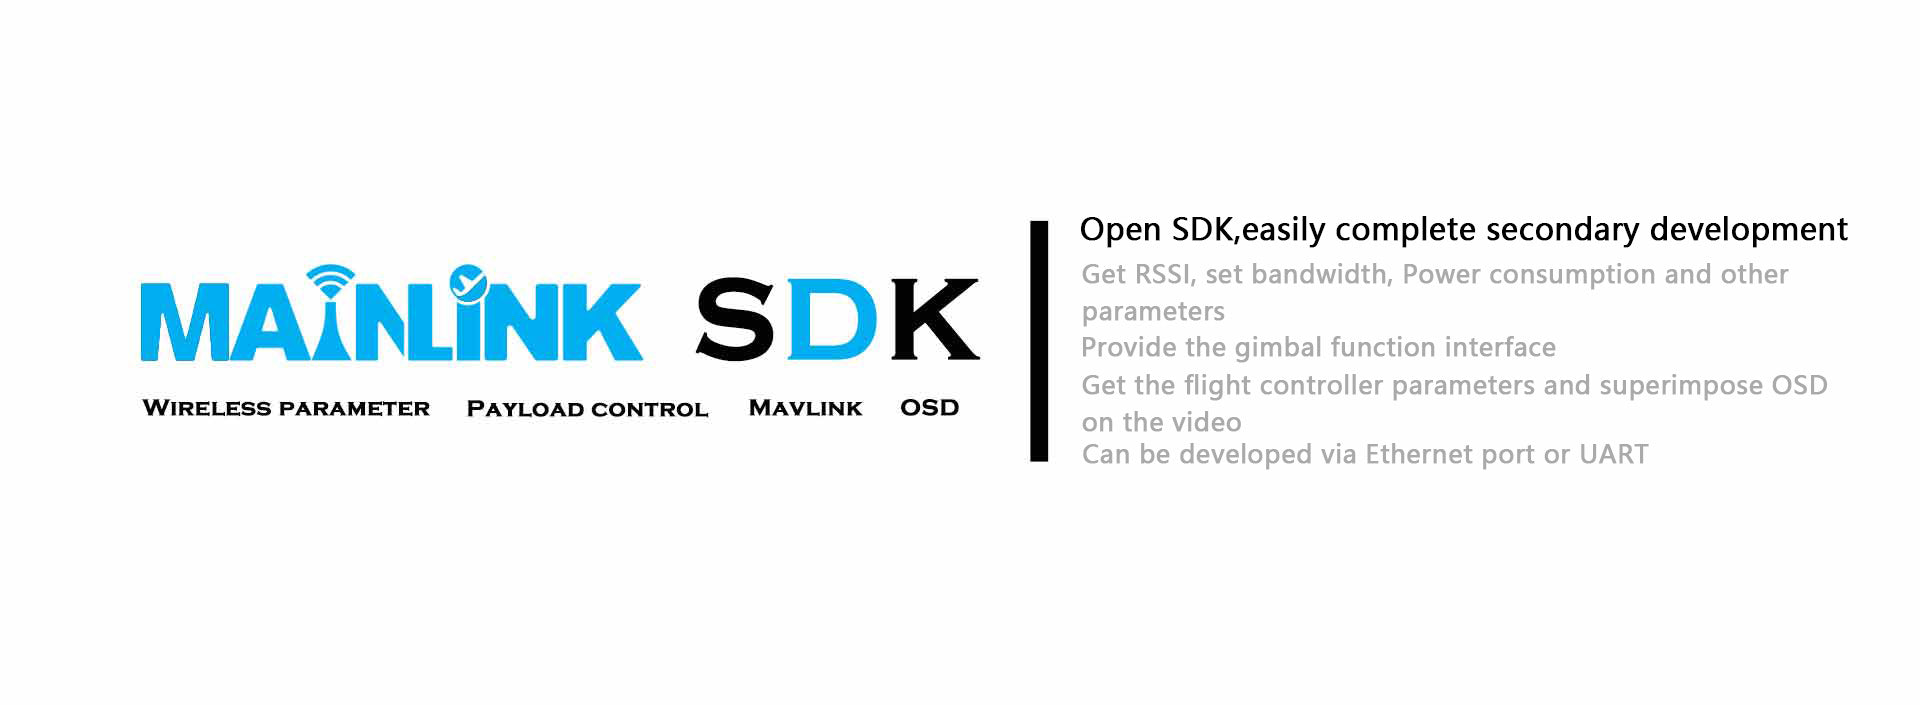 Maestro M52, Customize drone development using open SDK for settings like RSSI, bandwidth, and power consumption.